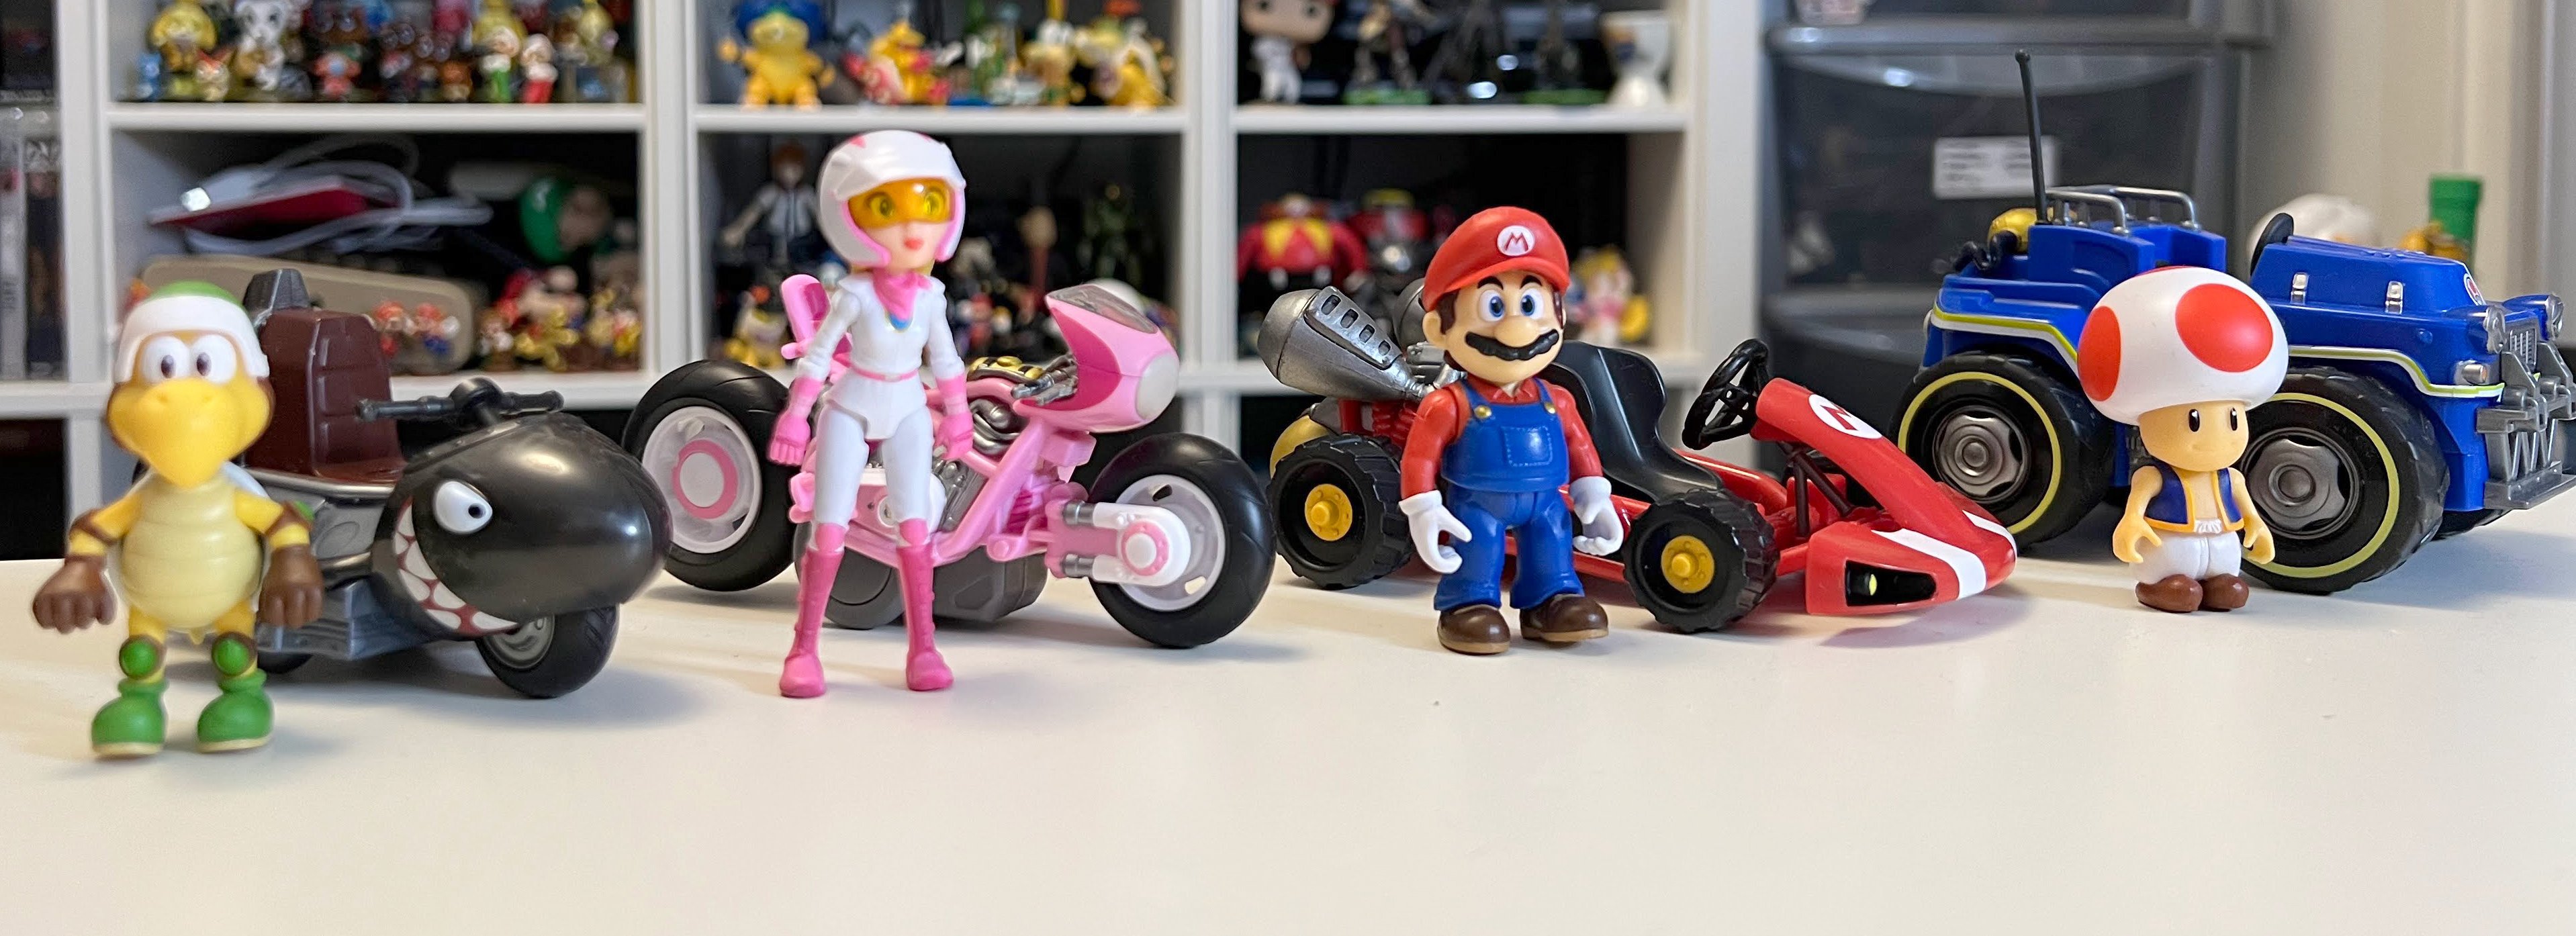 Review: The Super Mario Bros Movie toys aren't blowing smoke when it comes  to quality